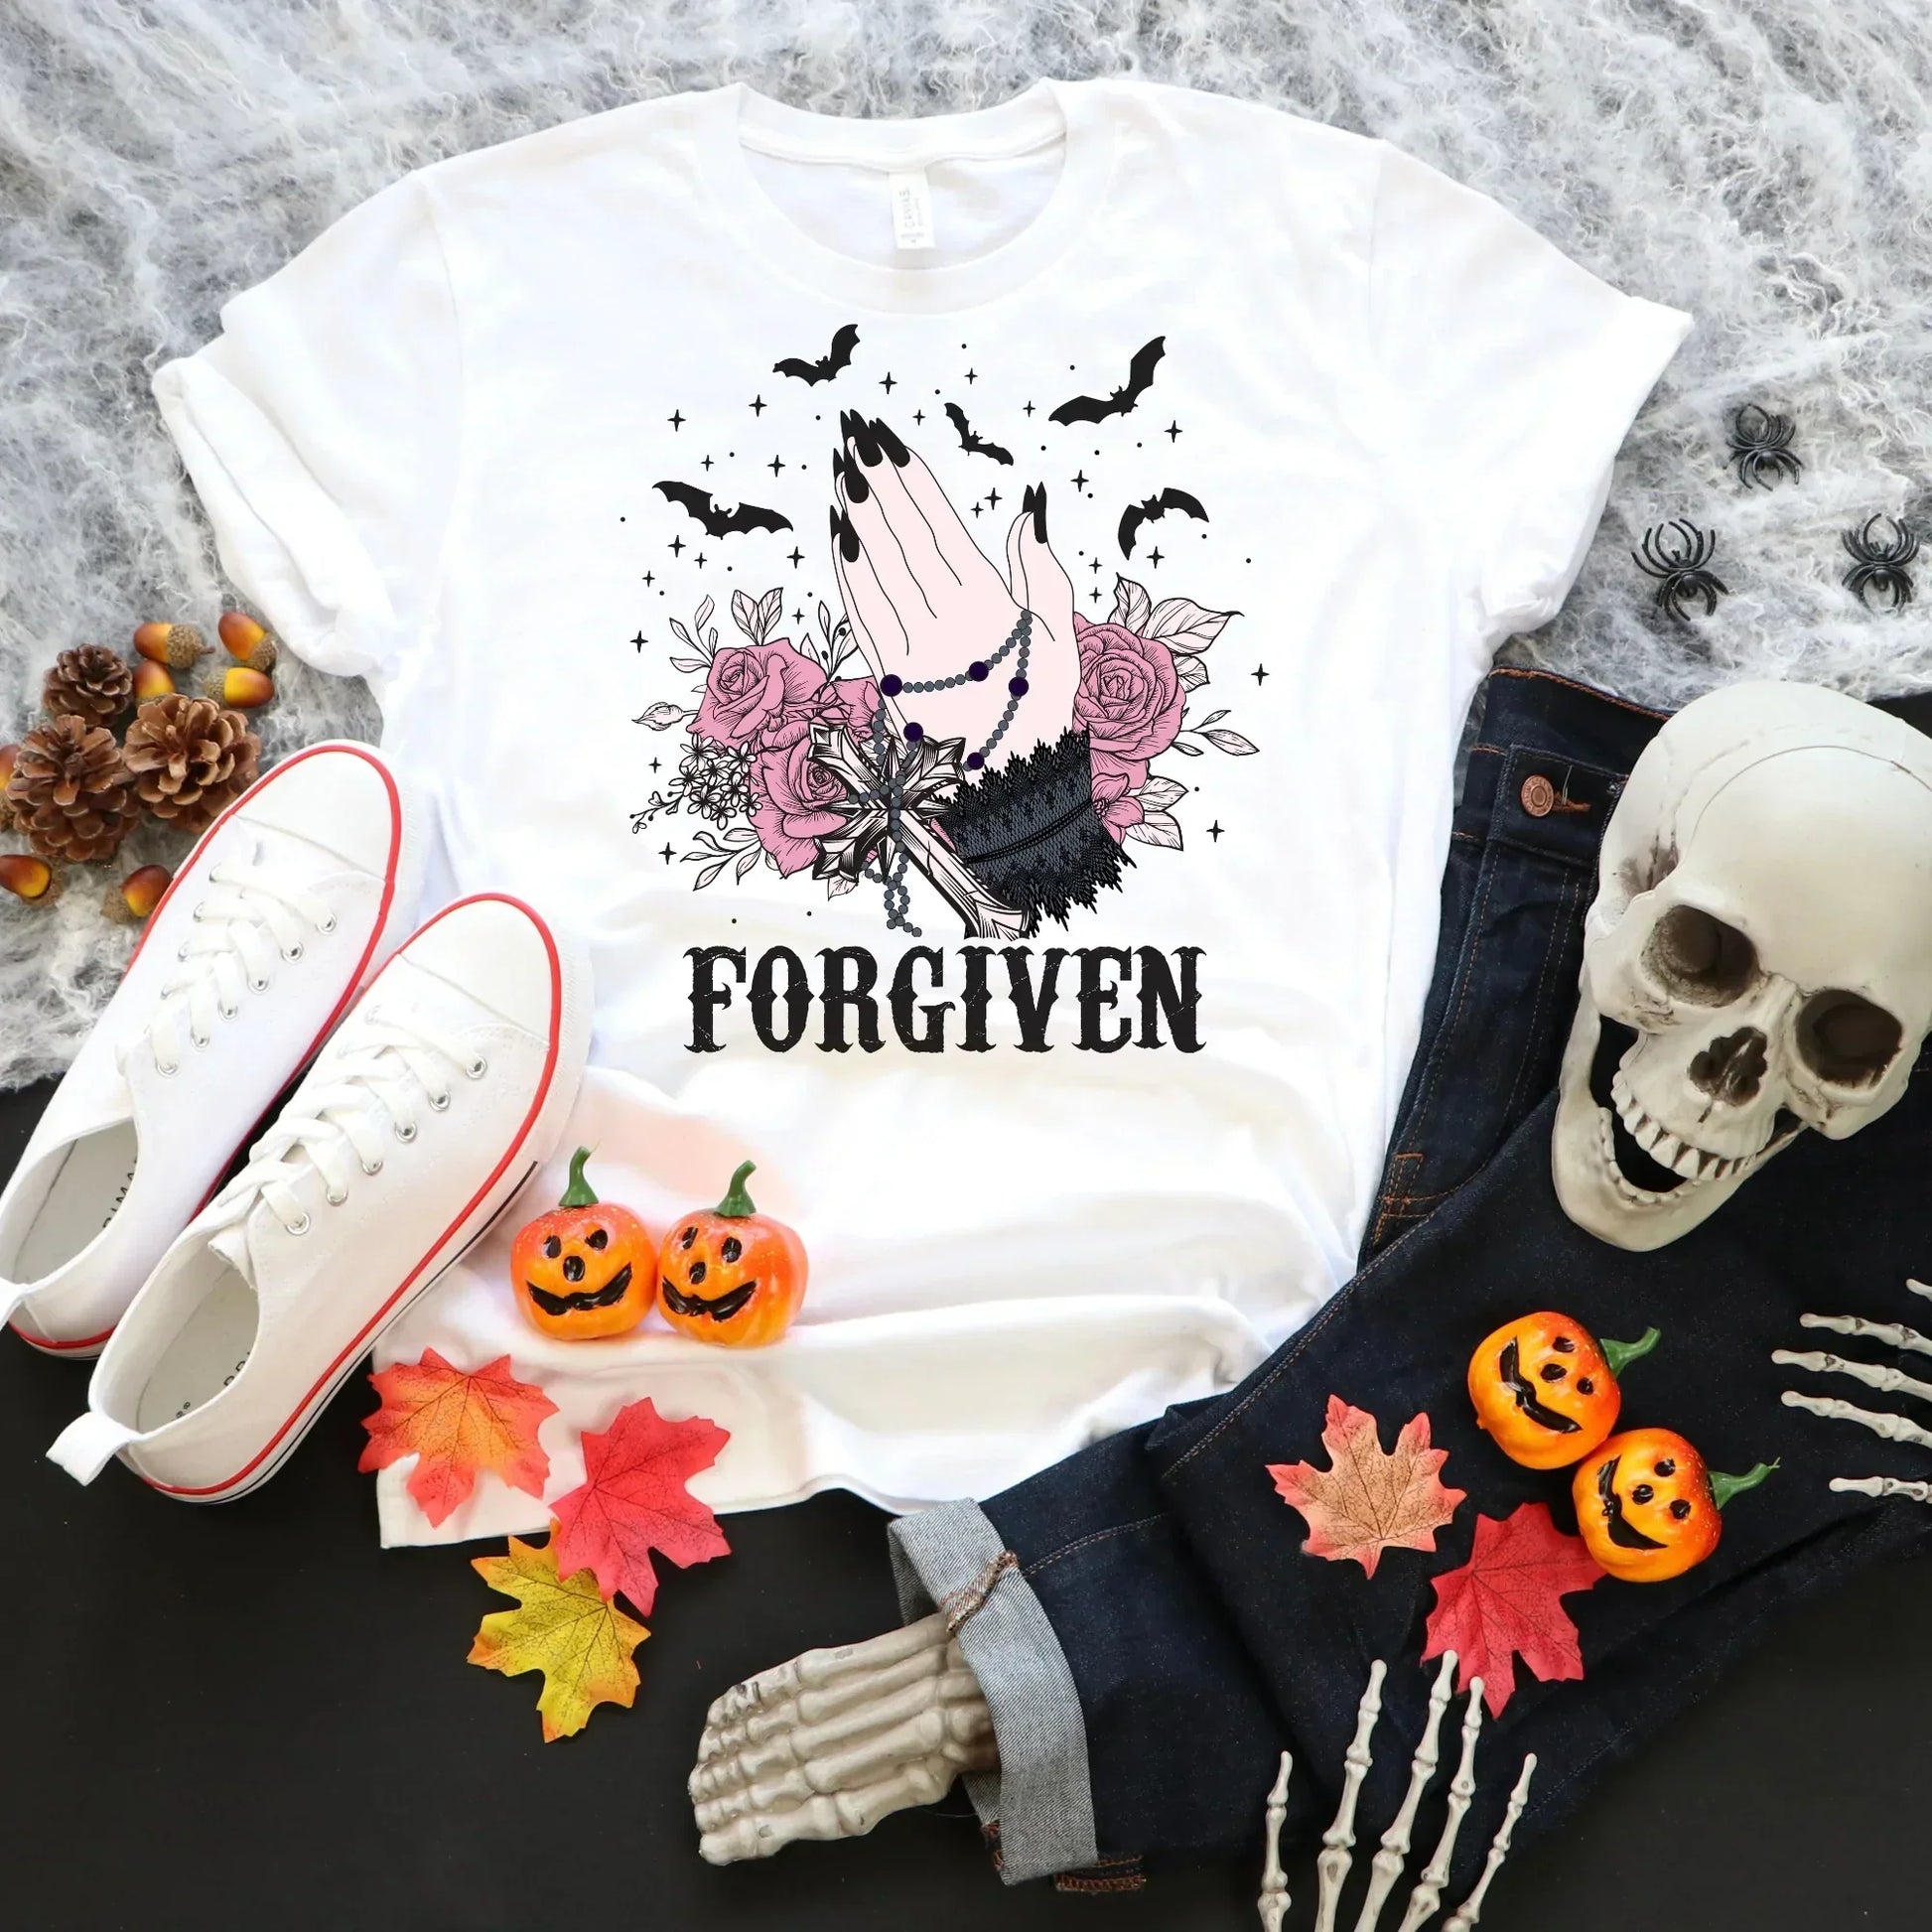 Forgiven Gothic Shirt, Halloween Sweatshirt, Witchy Vibes, Bats & Dead Roses Shirt, Moon Shirt, Magical Witch Shirt, Goth Style, Rot with Me, EMO Tee HMDesignStudioUS